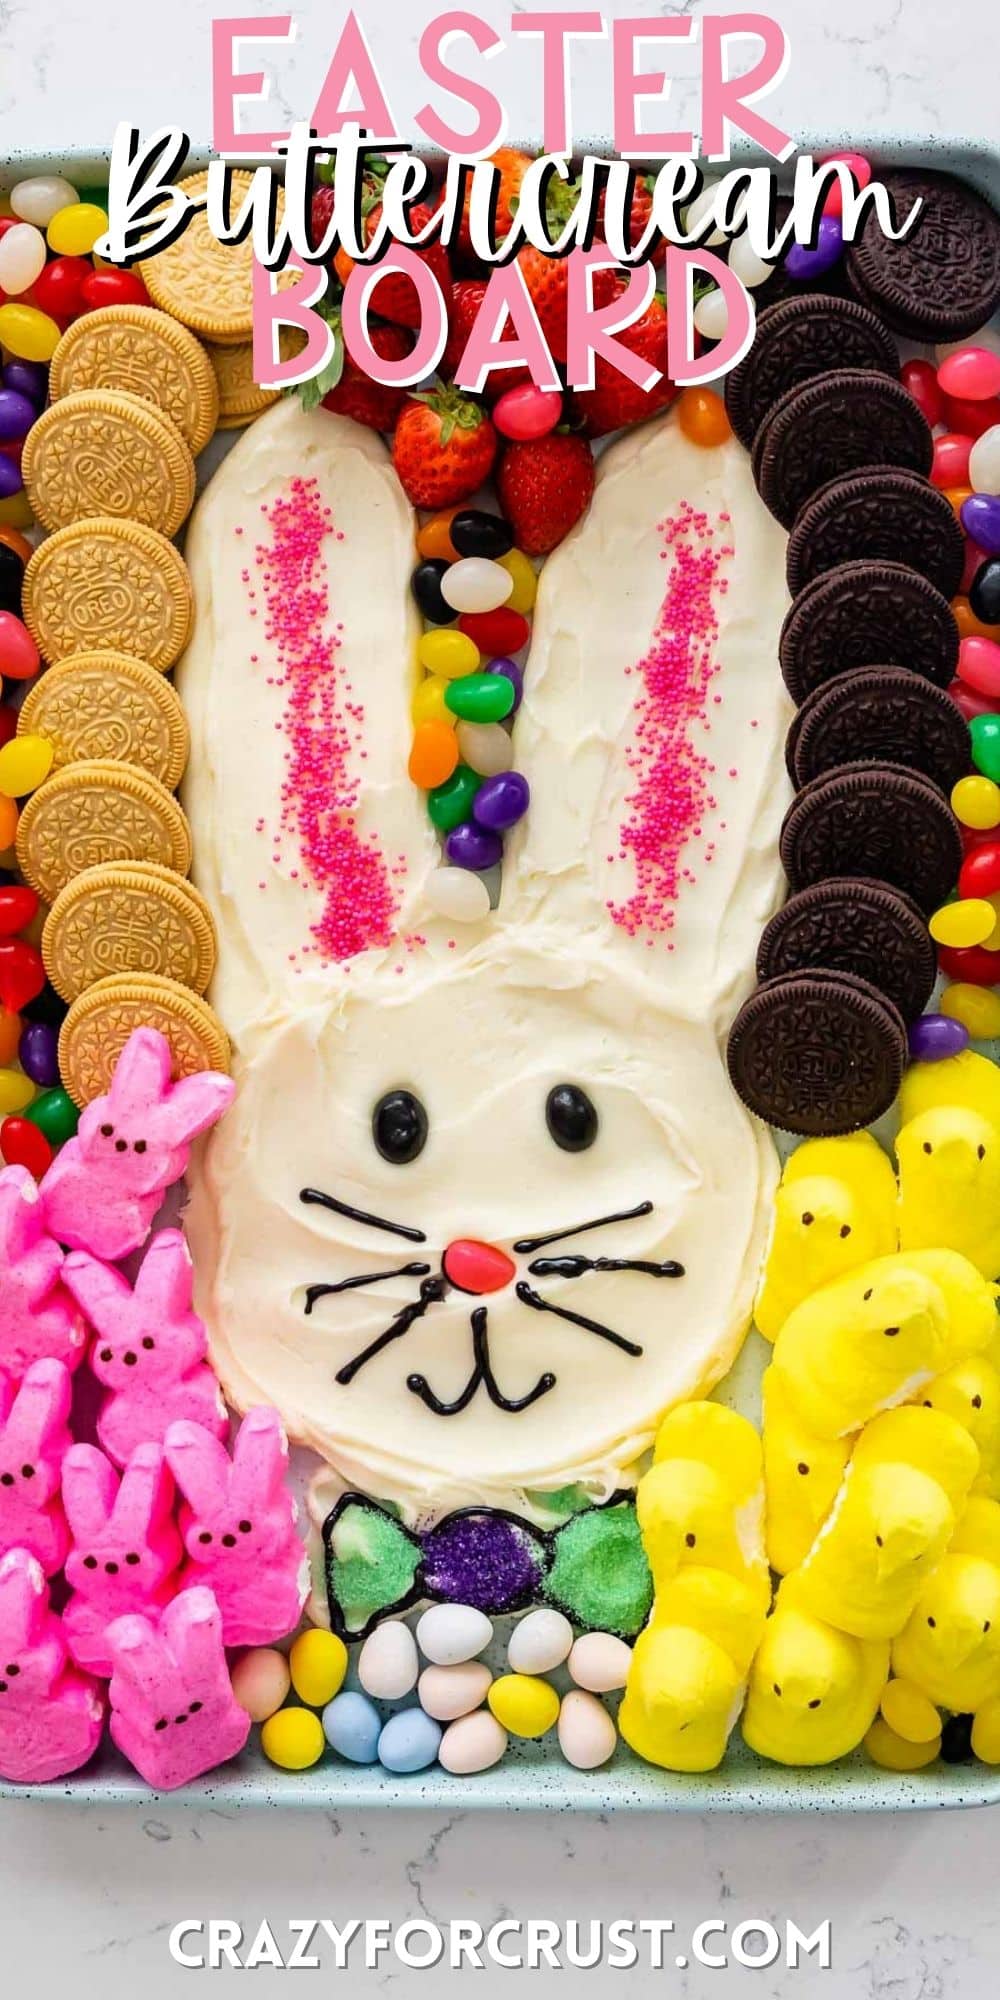 bunny shaped out of frosting and surrounded by jelly beans, marshmallows and oreos with words on the image.